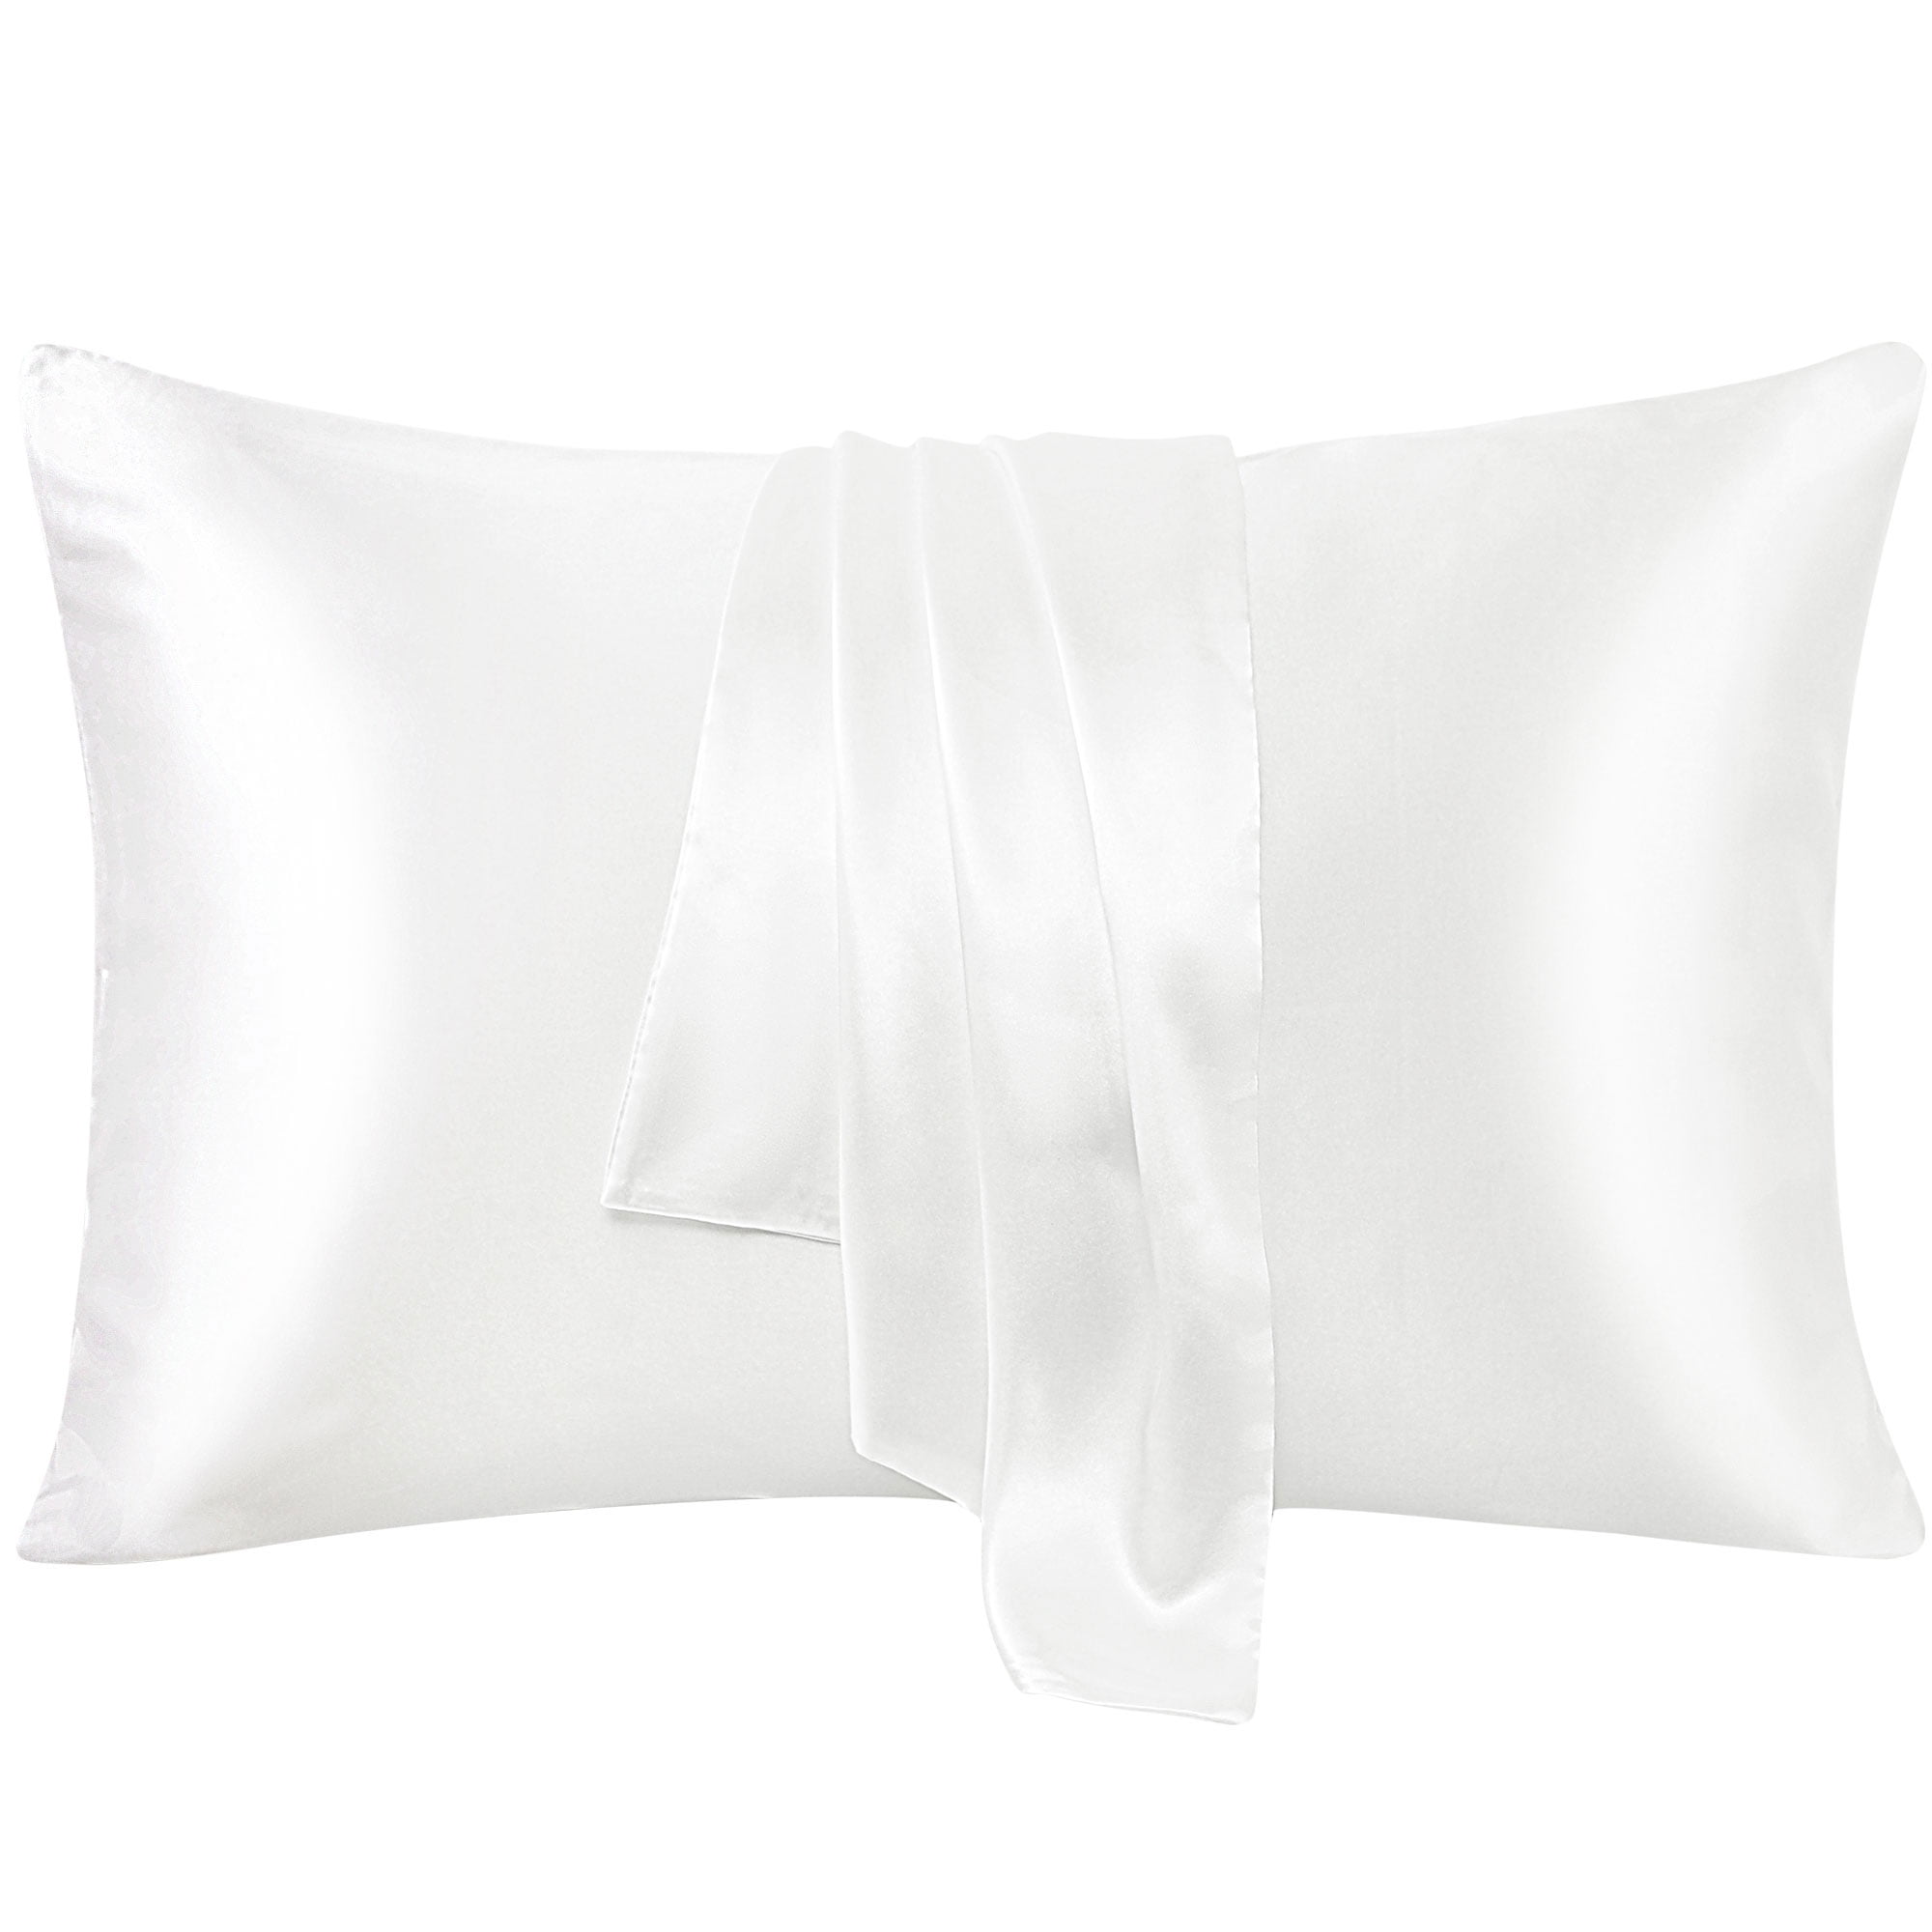 Details about   100% Microfiber Pillowcases 4 Pack Ultra Soft Washable Wrinkle Fade Free 20"x30" 